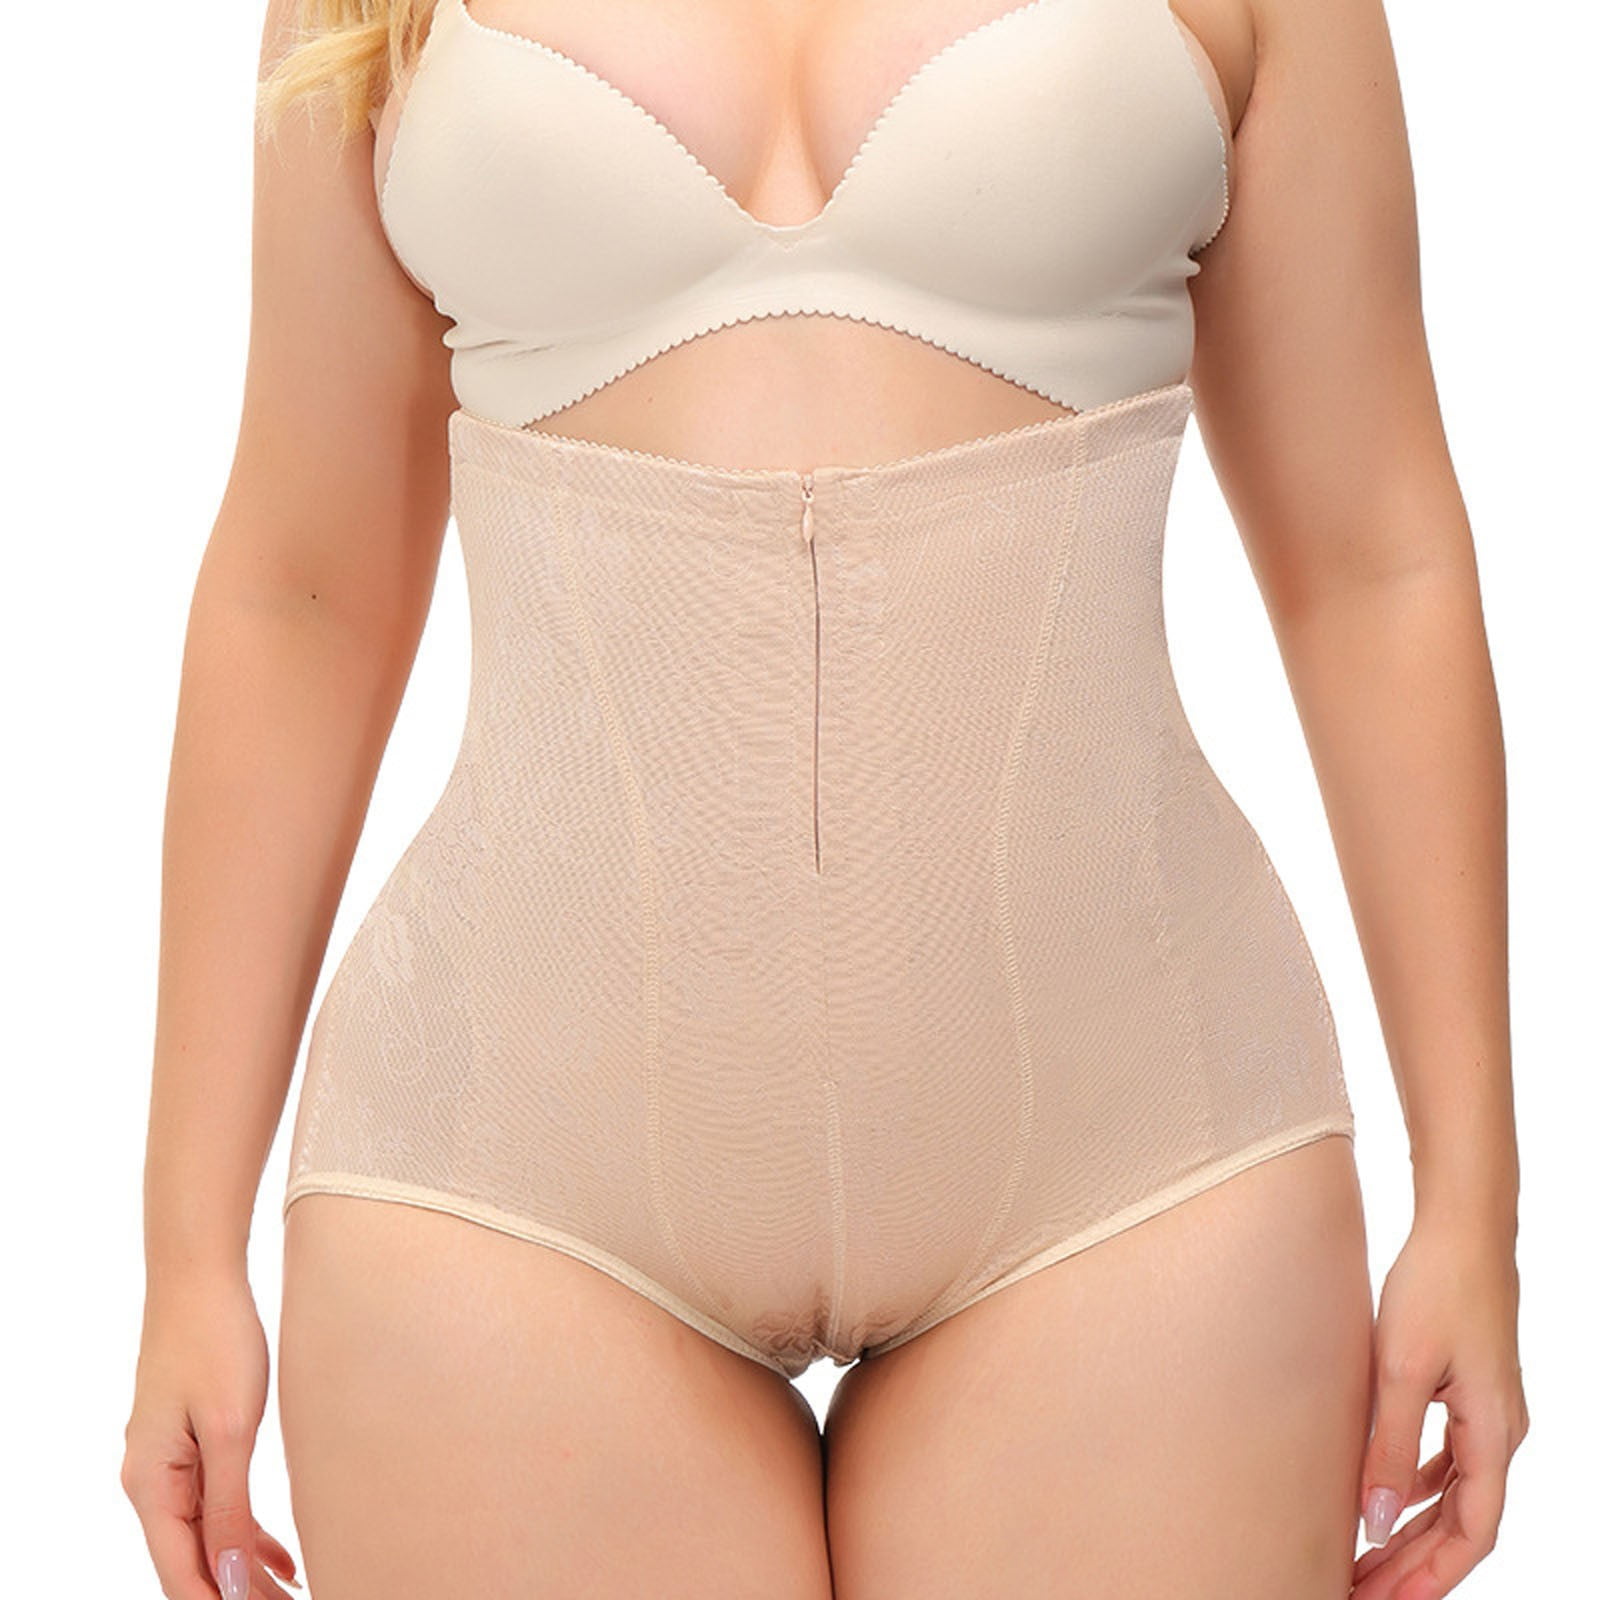 fvwitlyh Shapewear for Women Tummy Control Shape Ware for Woman Shorts  Lifting Sponge Cushion Underwear Casual Lace Corset Patch Women Full Spanks  for Women 